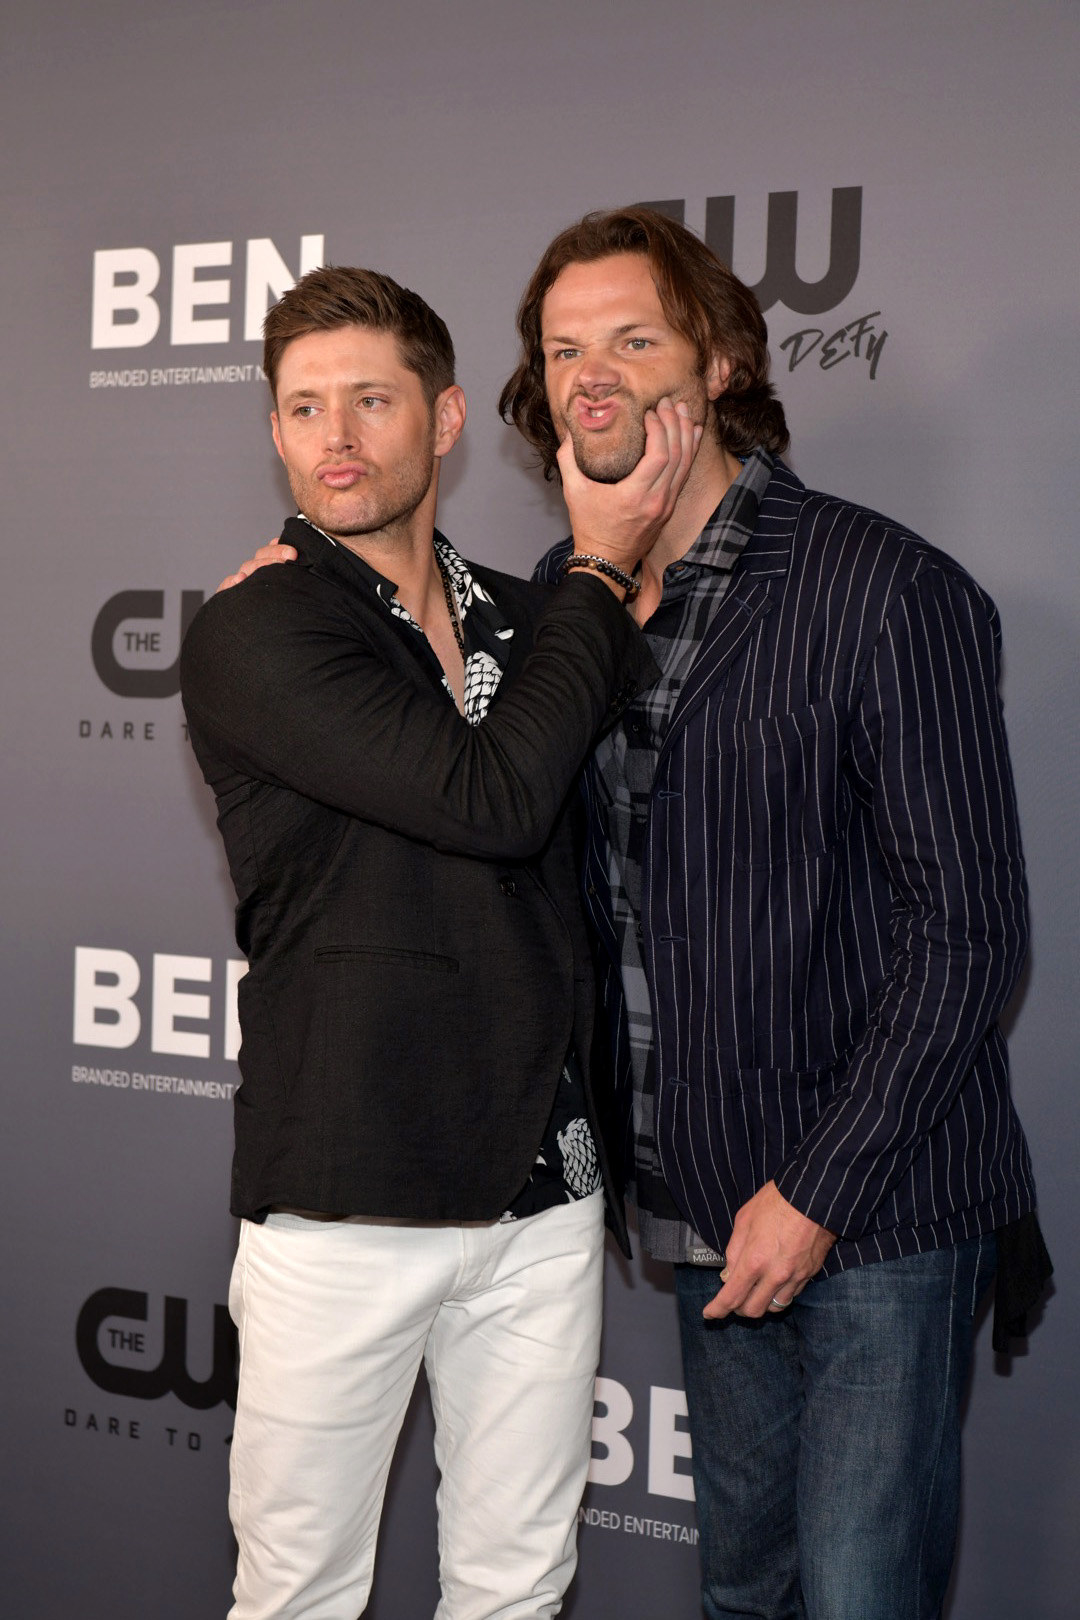 Jared and Jensen at an event together